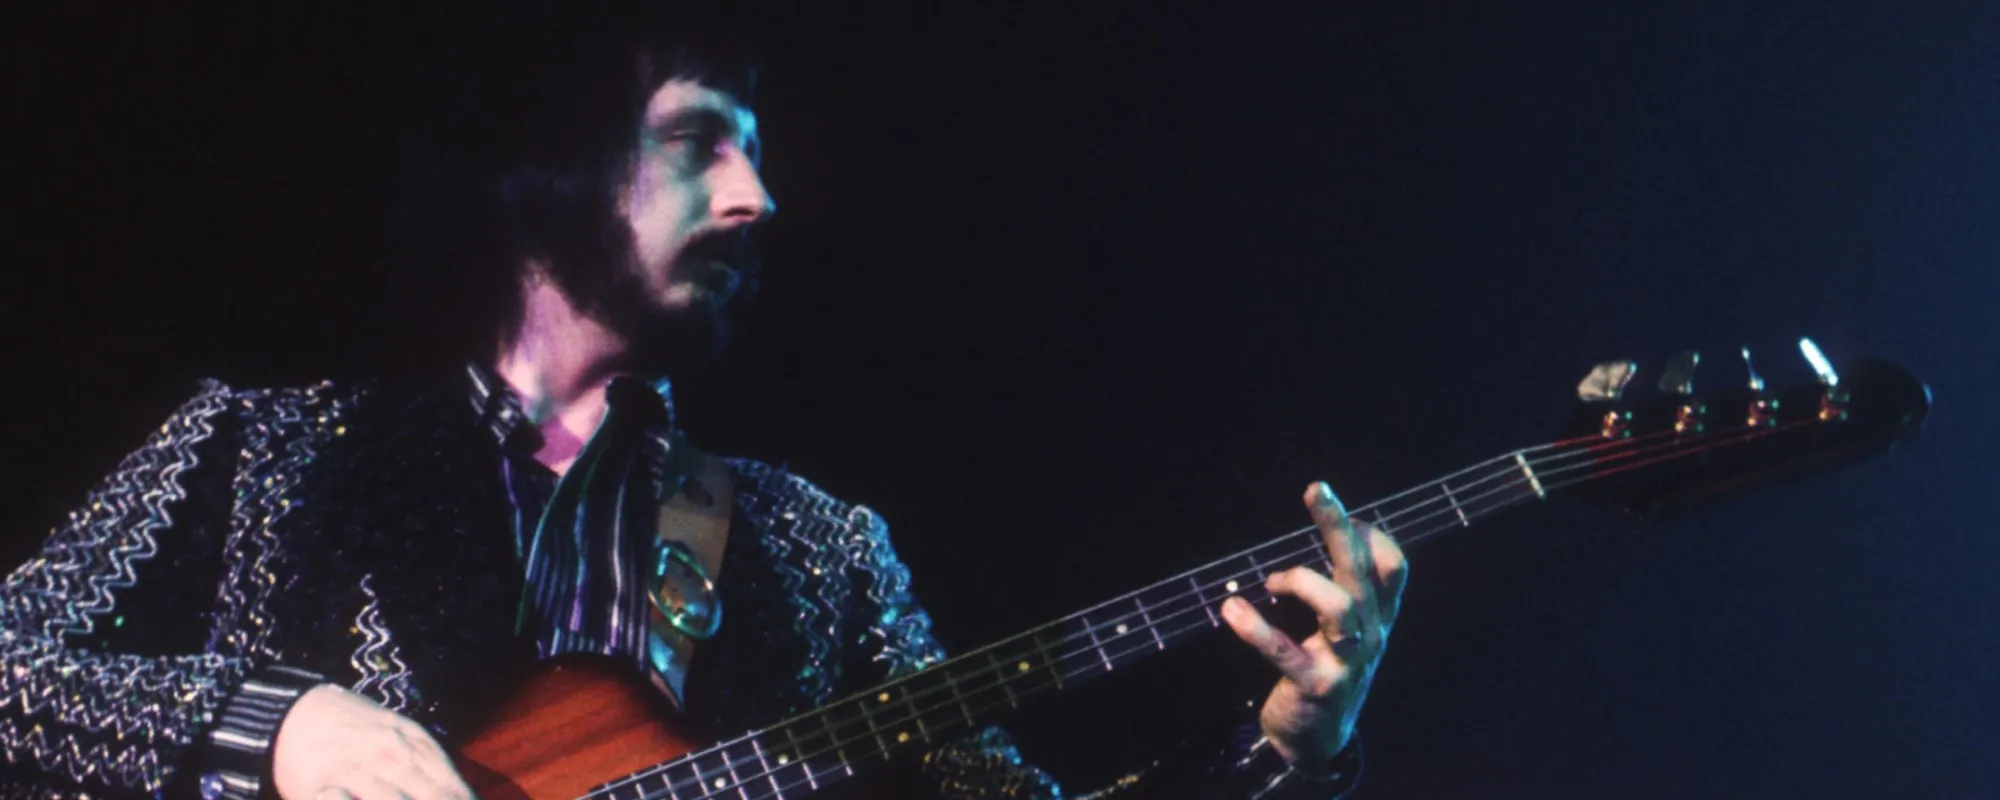 ‘The Ox Box’: Late Who Bassist John Entwistle’s Expanded Solo Catalog to Be Released as CD Box Set